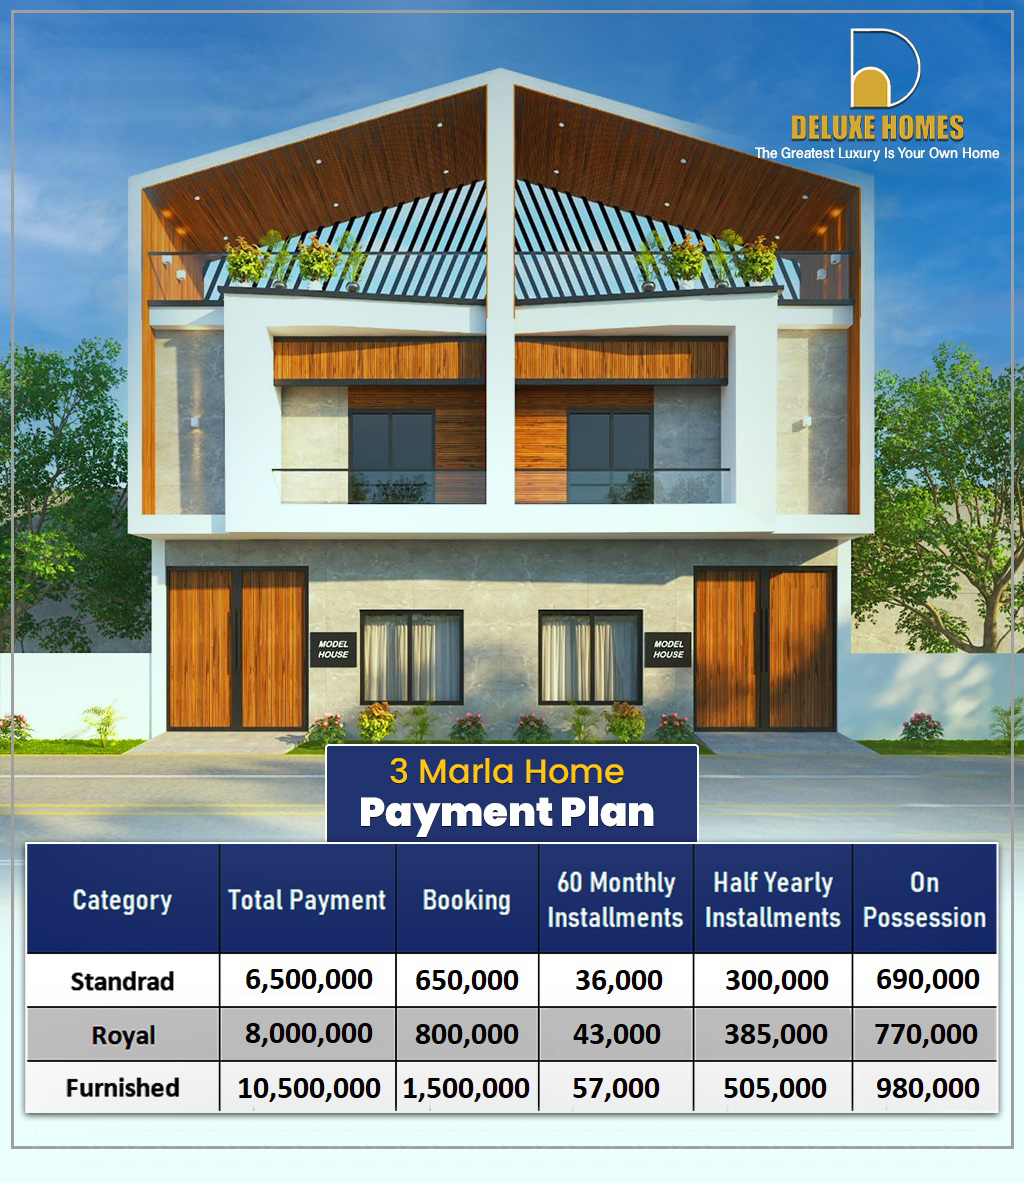 Deluxe Homes after Launch Payment Plan